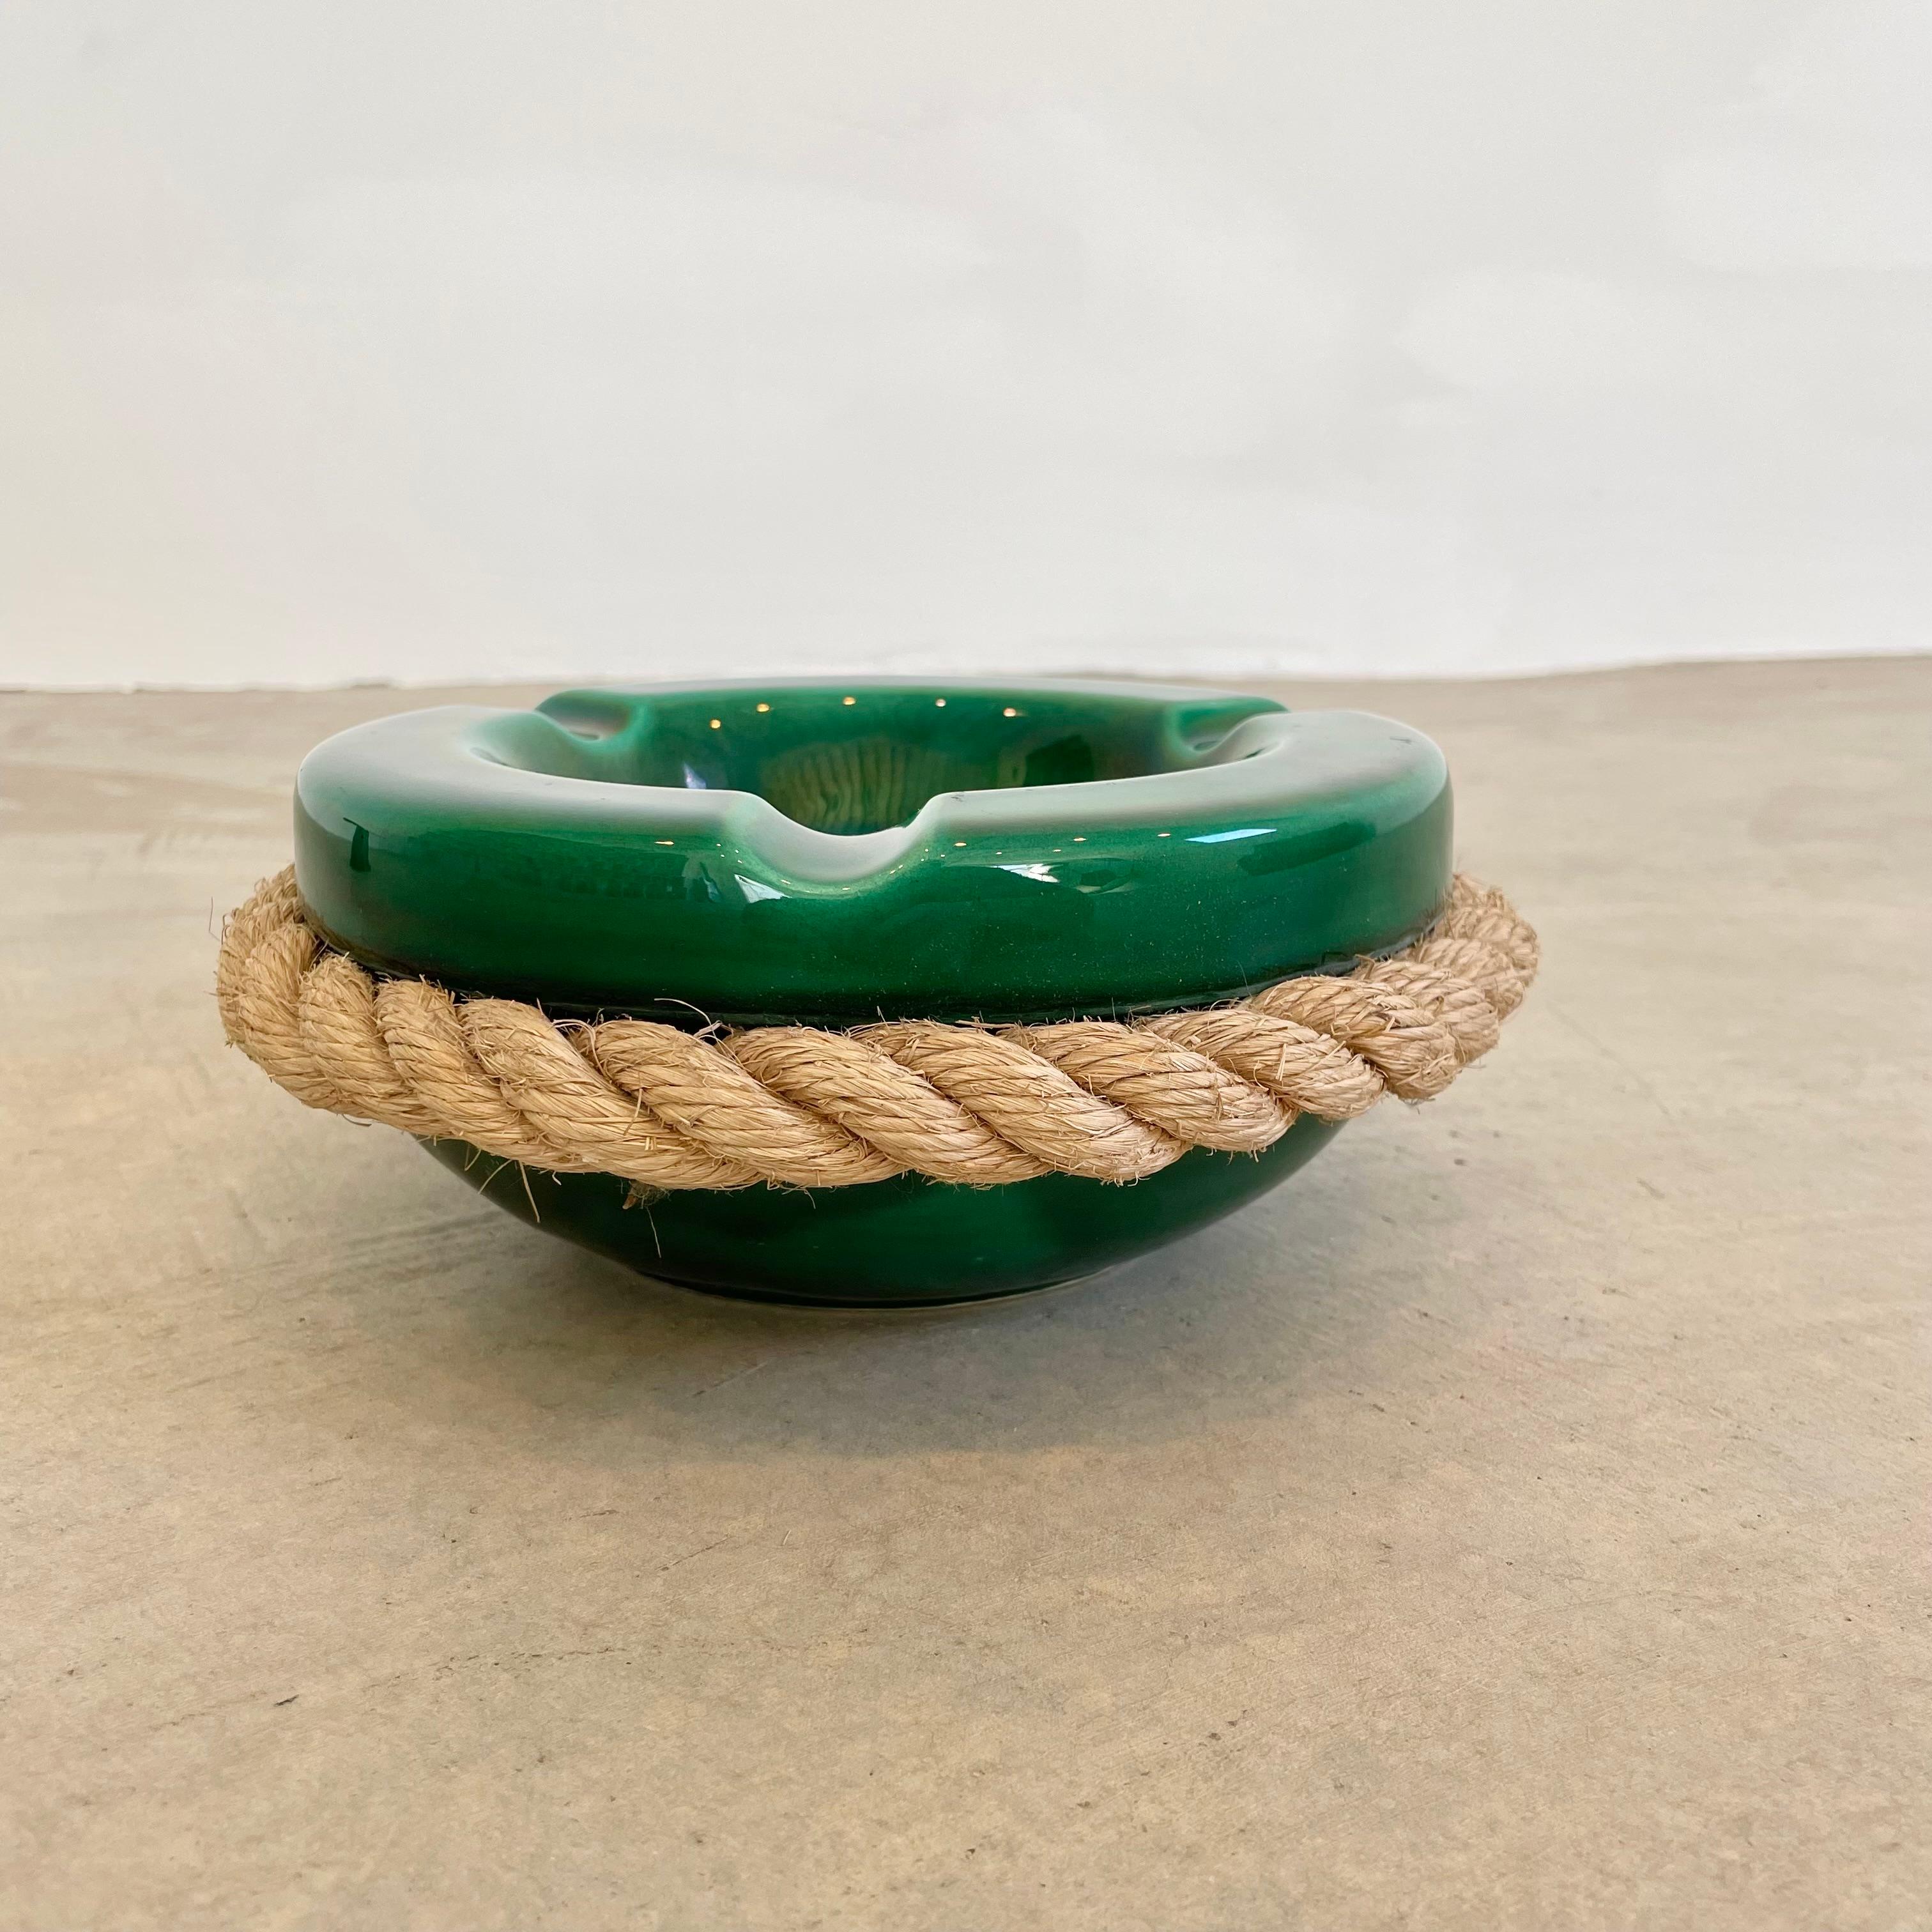 Audoux Minet Style Green Ceramic Ashtray with Rope, 1970s France 1